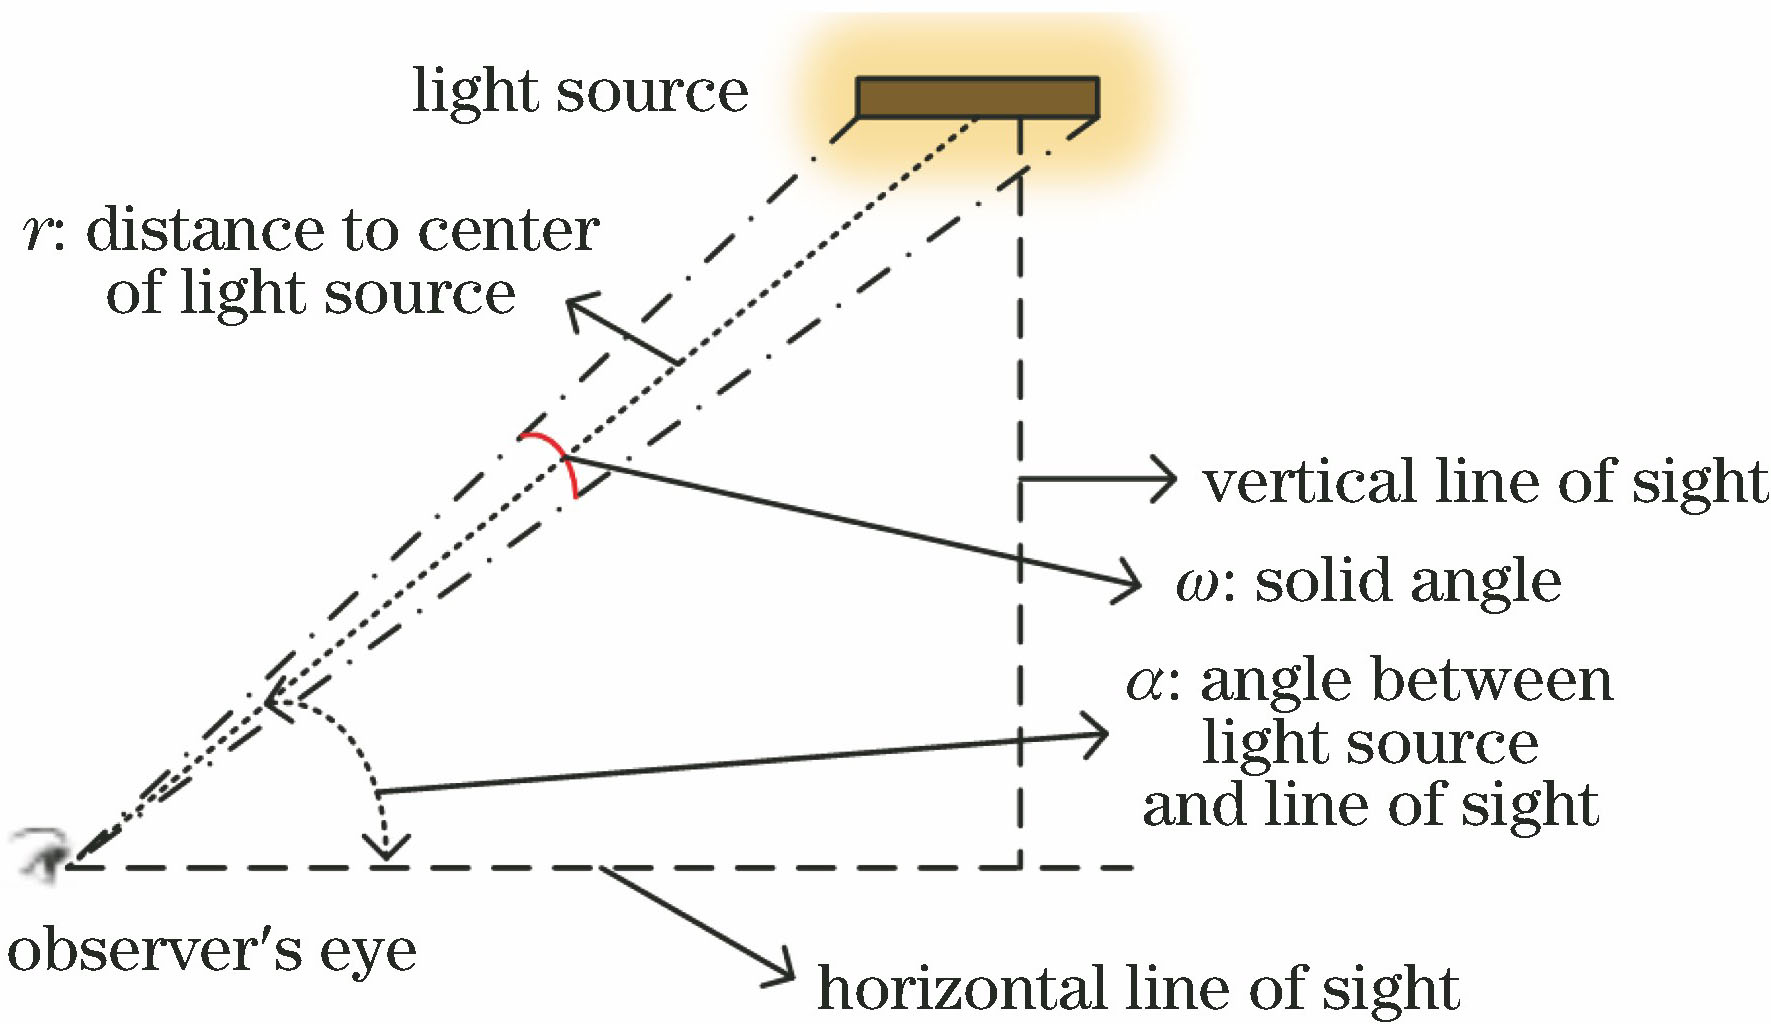 Parameters of unified glare rating RUGR